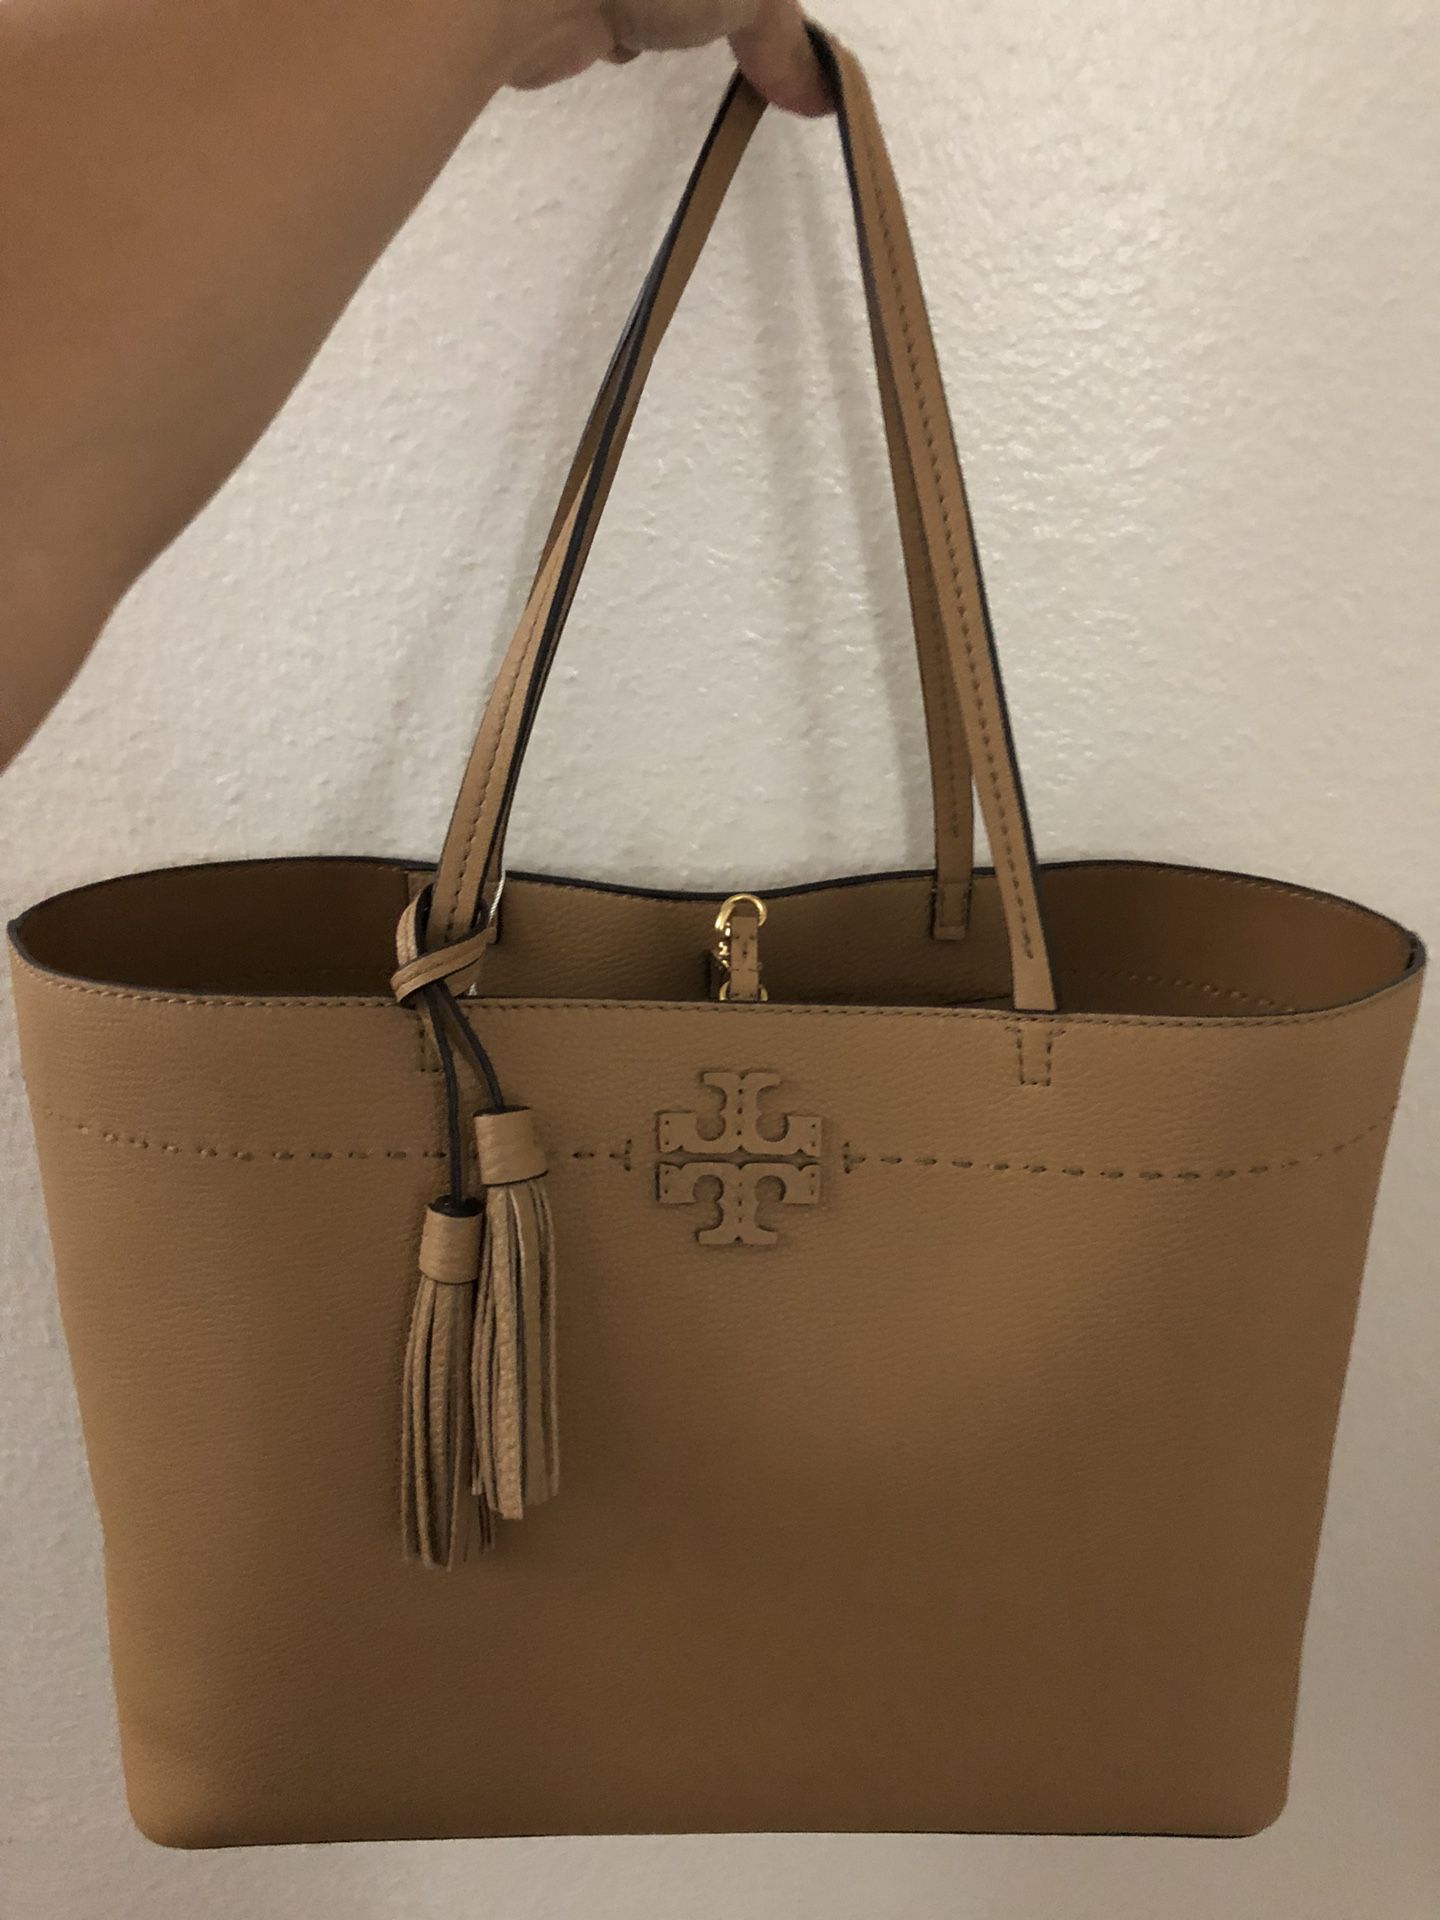 Authentic Tory Burch tote 